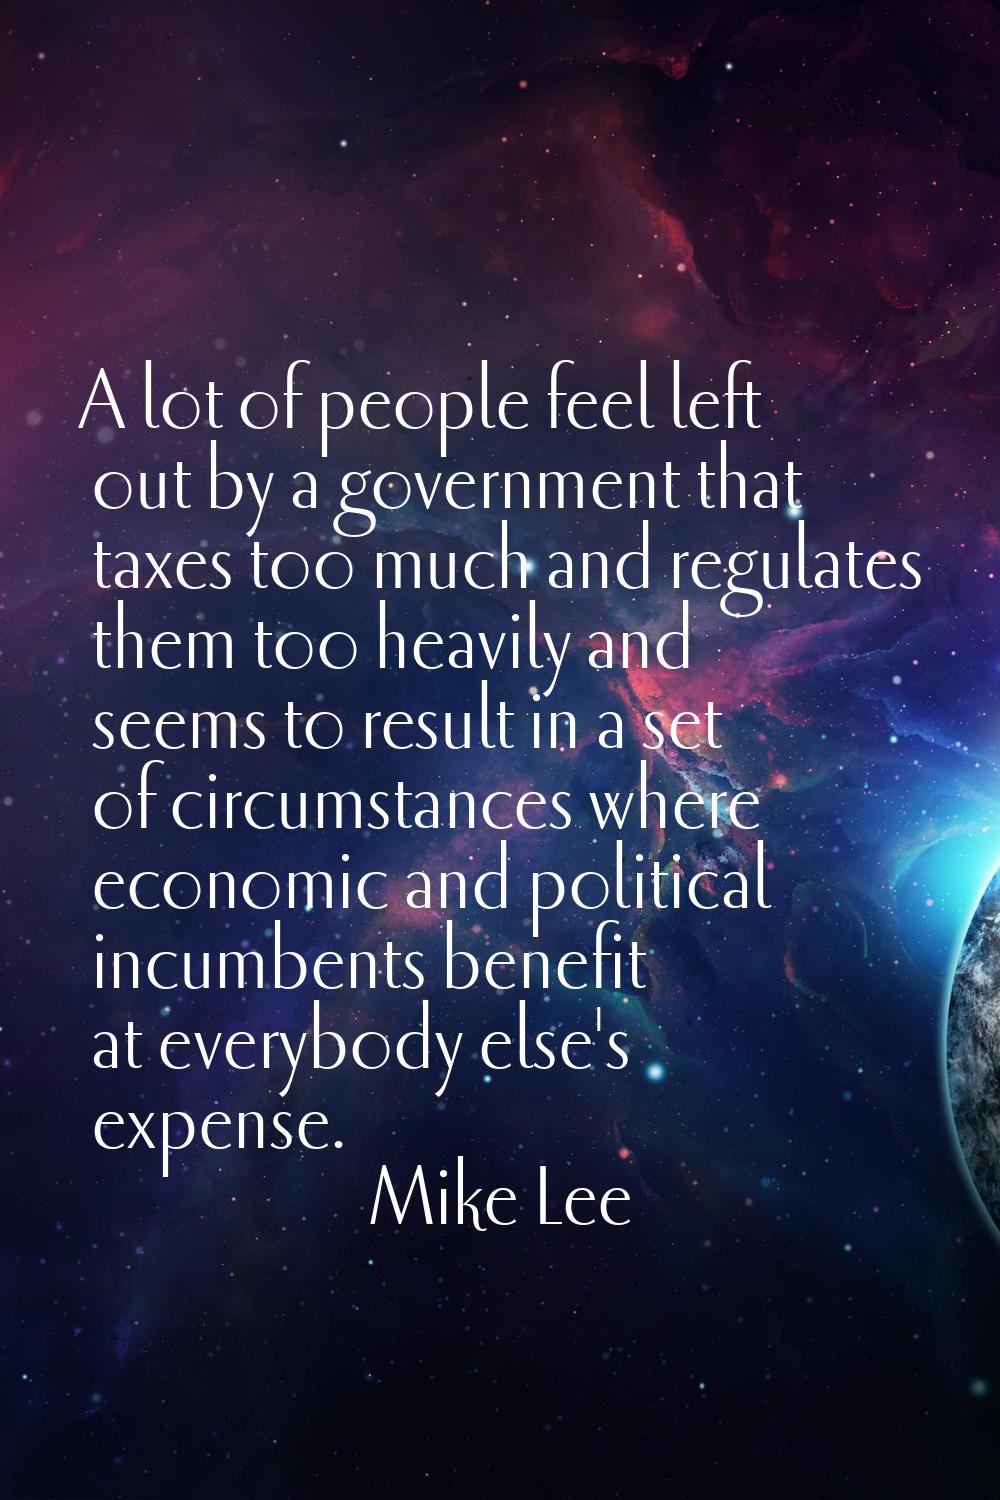 A lot of people feel left out by a government that taxes too much and regulates them too heavily an